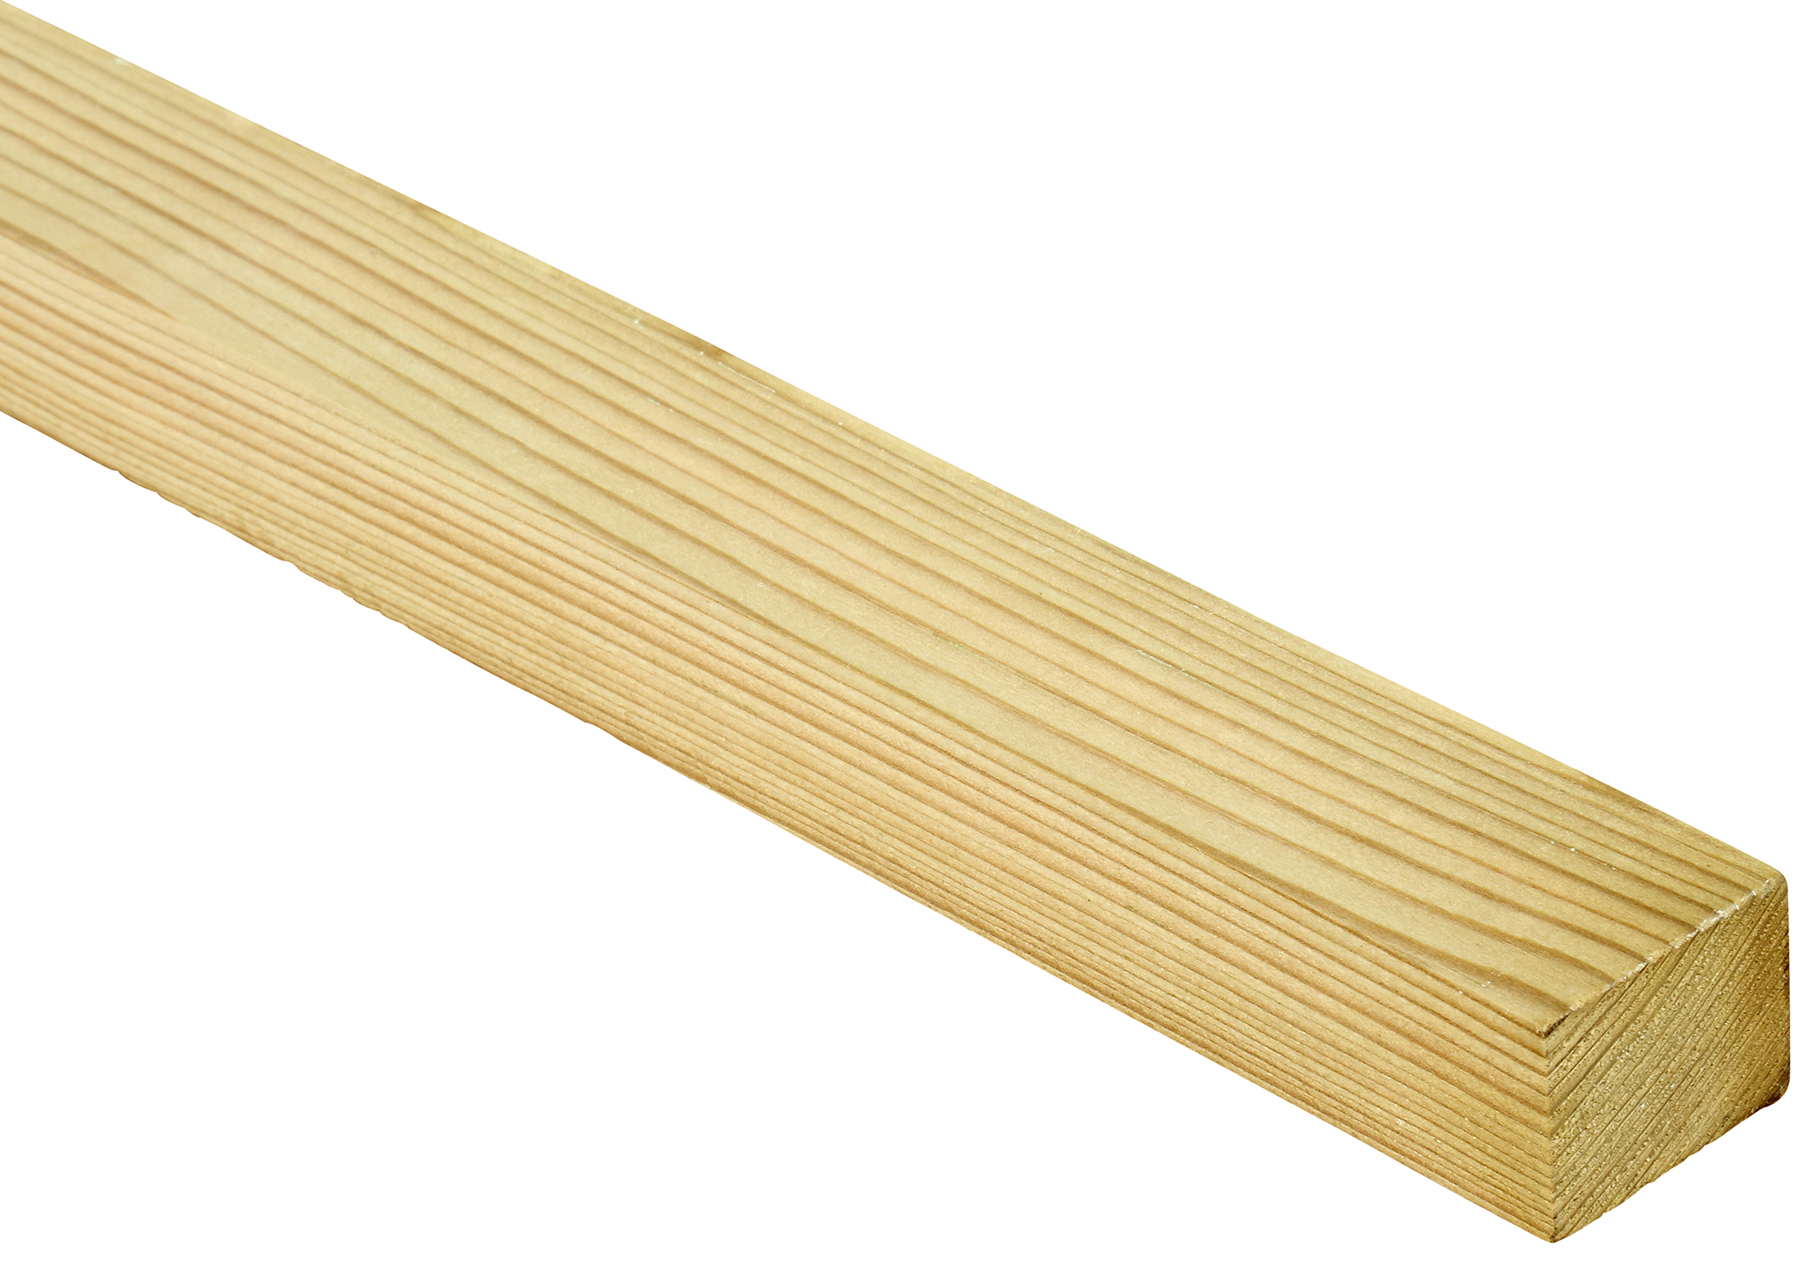 Wickes Treated Sawn Timber - 22 x 47 x 2400mm - Pack of 150